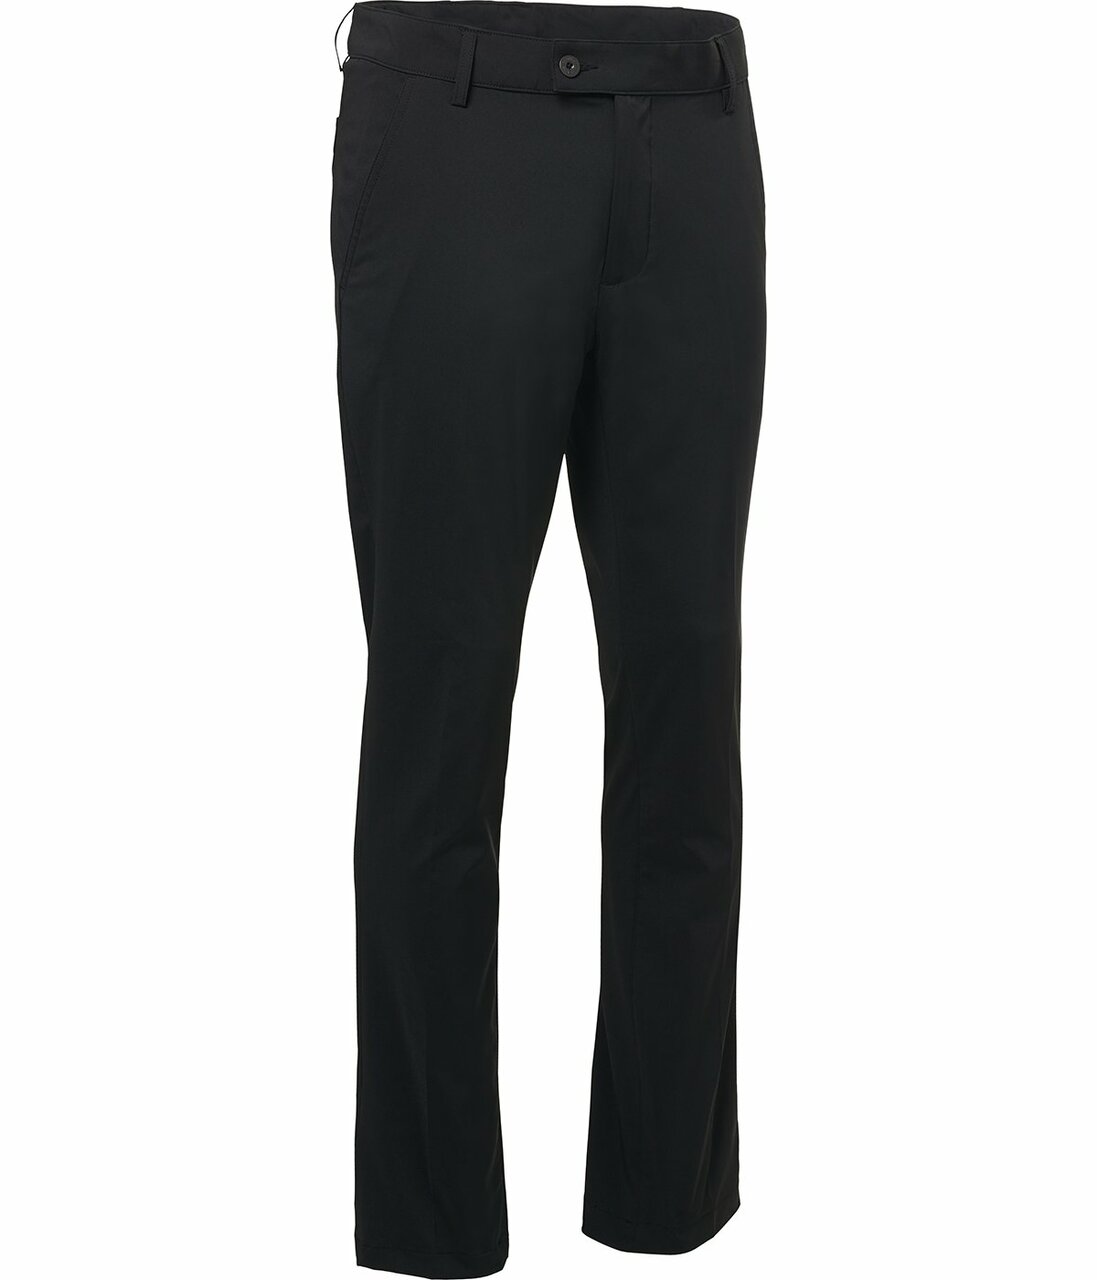 Abacus Sports Wear: Men’s High-Performance Stretch Trousers – Cleek